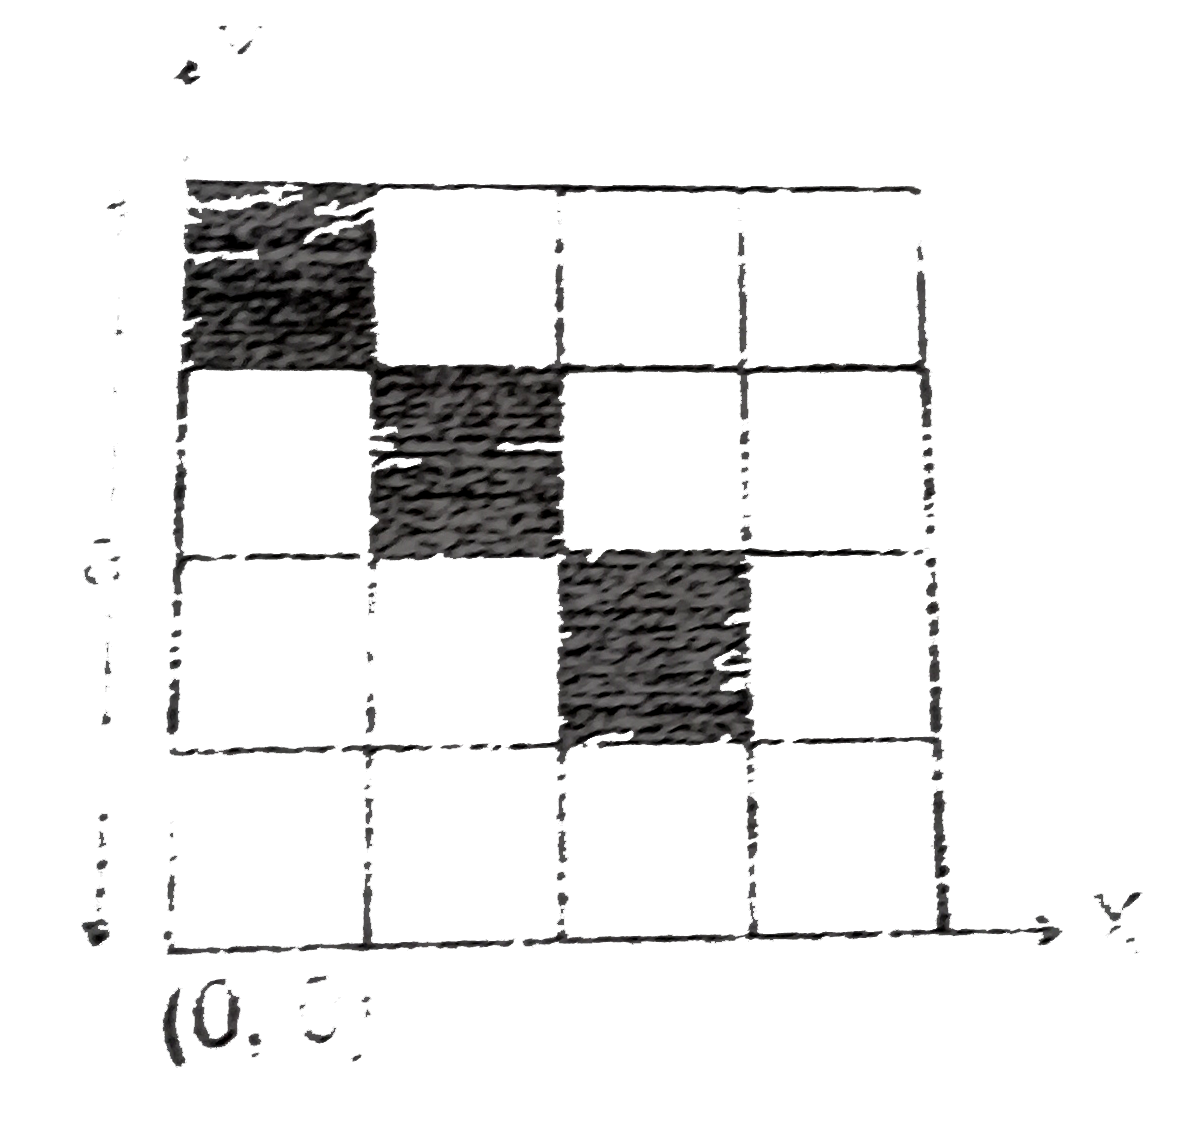 From a uniform square plate the shaped portions are removed as shown in figure. The coordinates of centre of mass of the remaining plate are x,y Axes and origon are shown in figure.